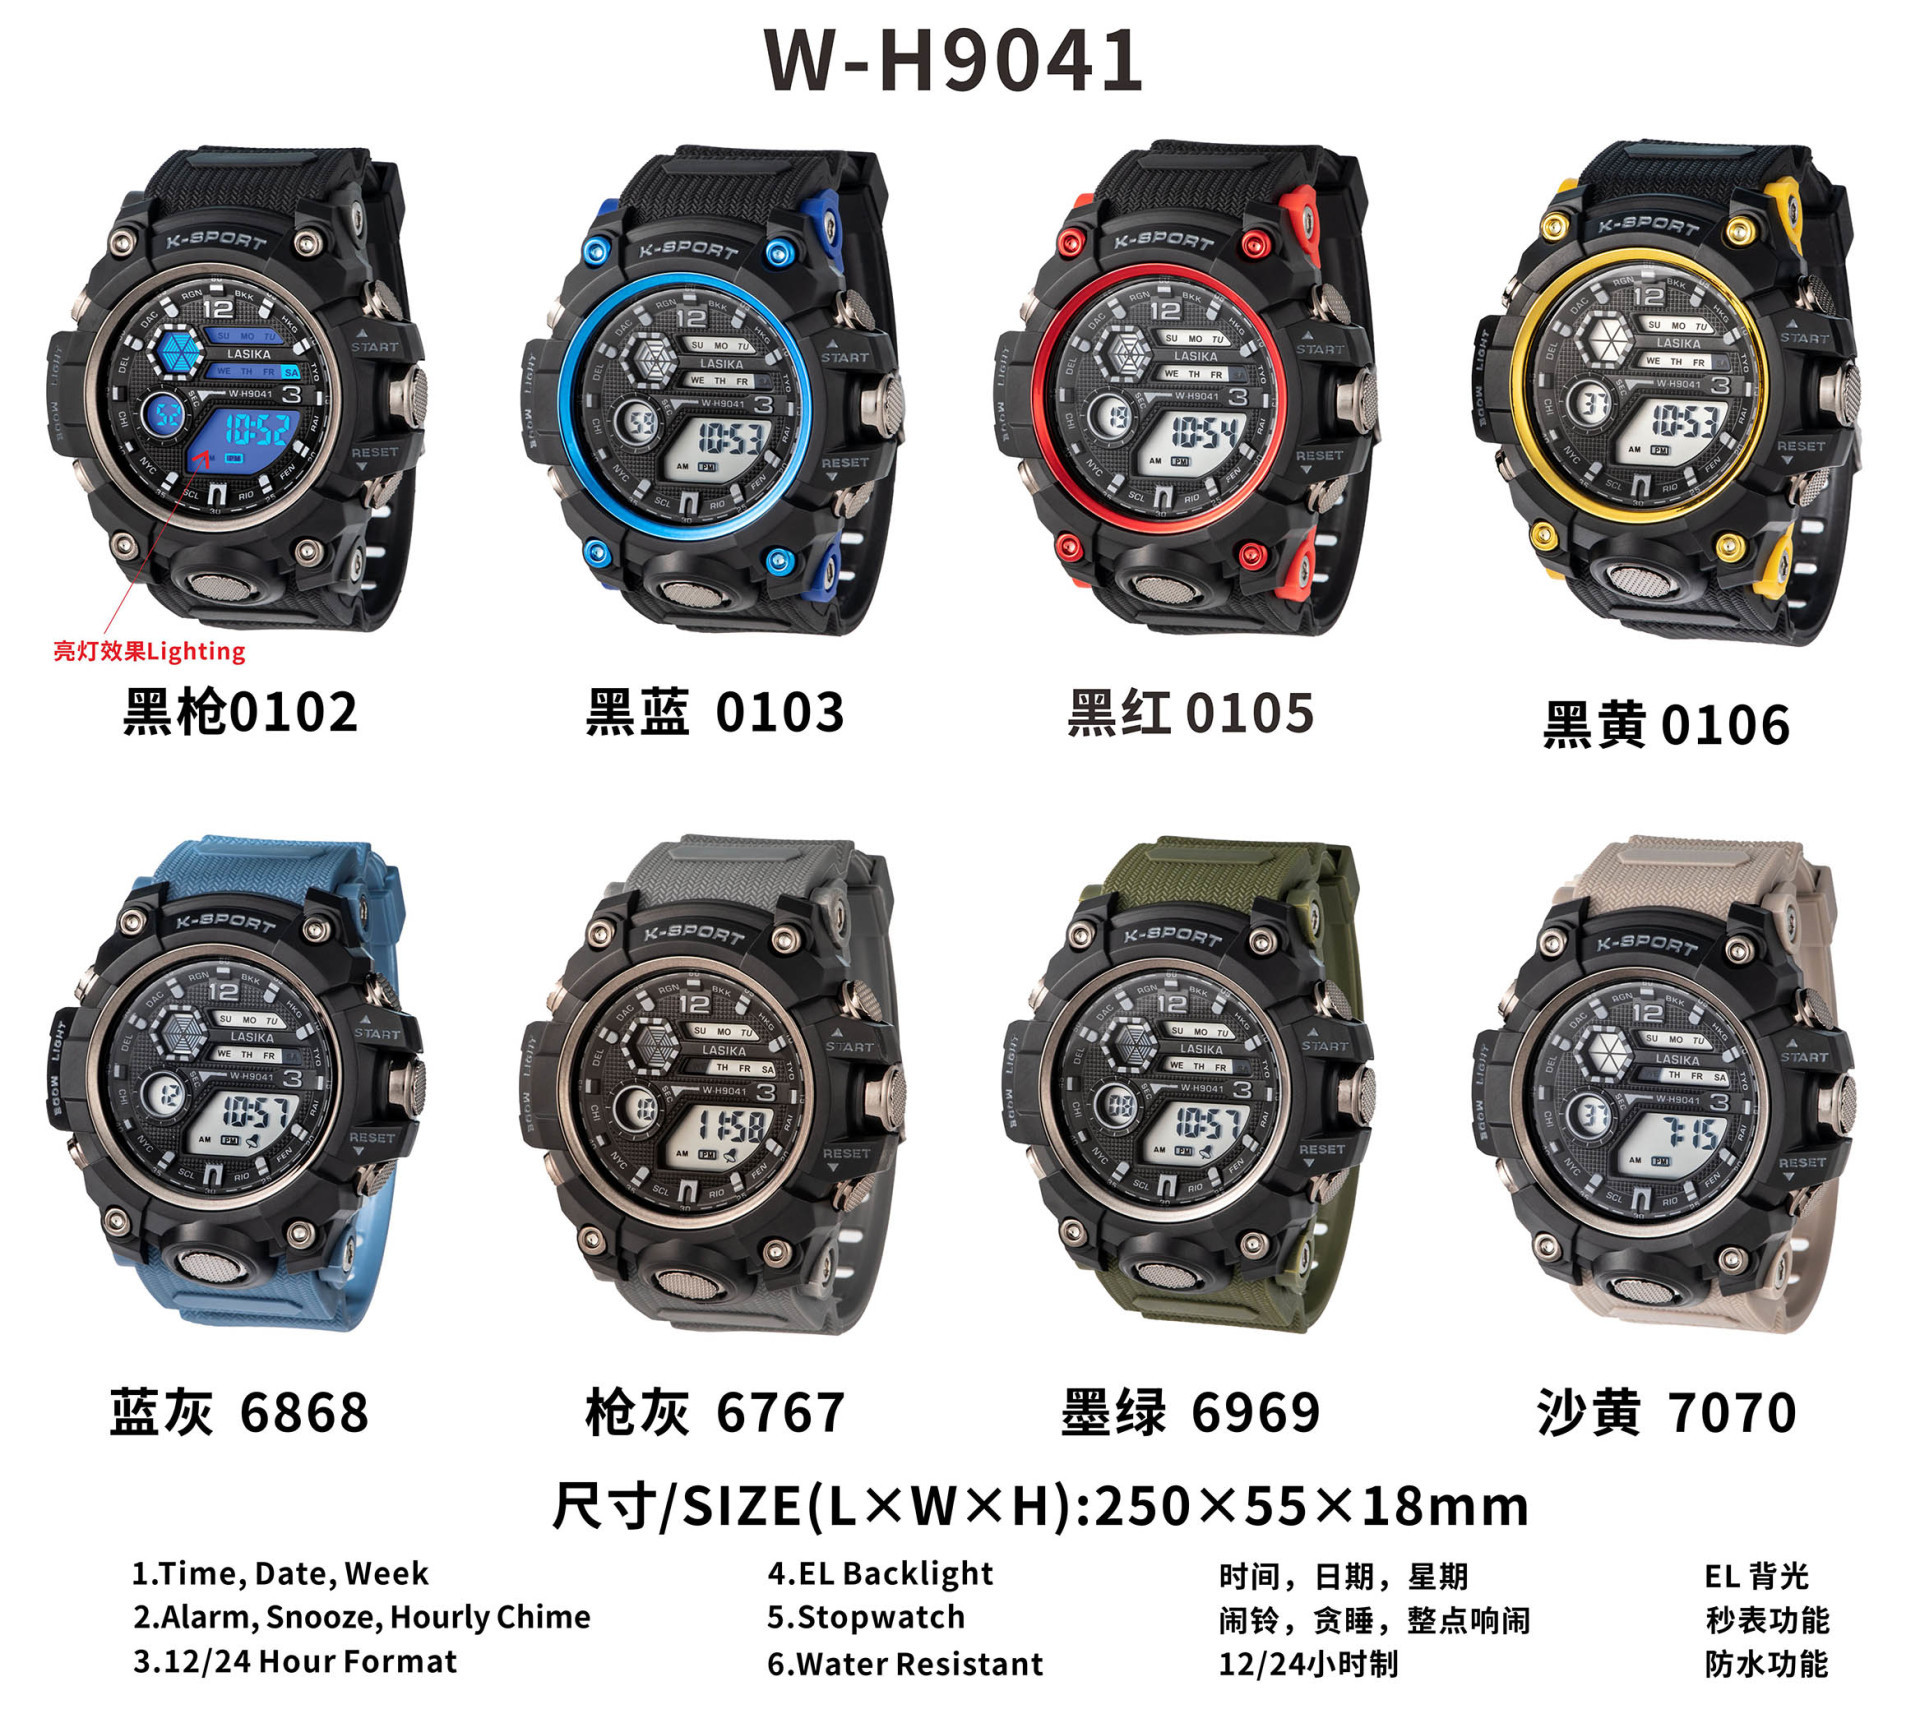 Men's Digital Sport Watch Large Face Sports Outdoor Waterproof Military Wrist Watches for Men with Date Multifunction Army Stopwatch #9041